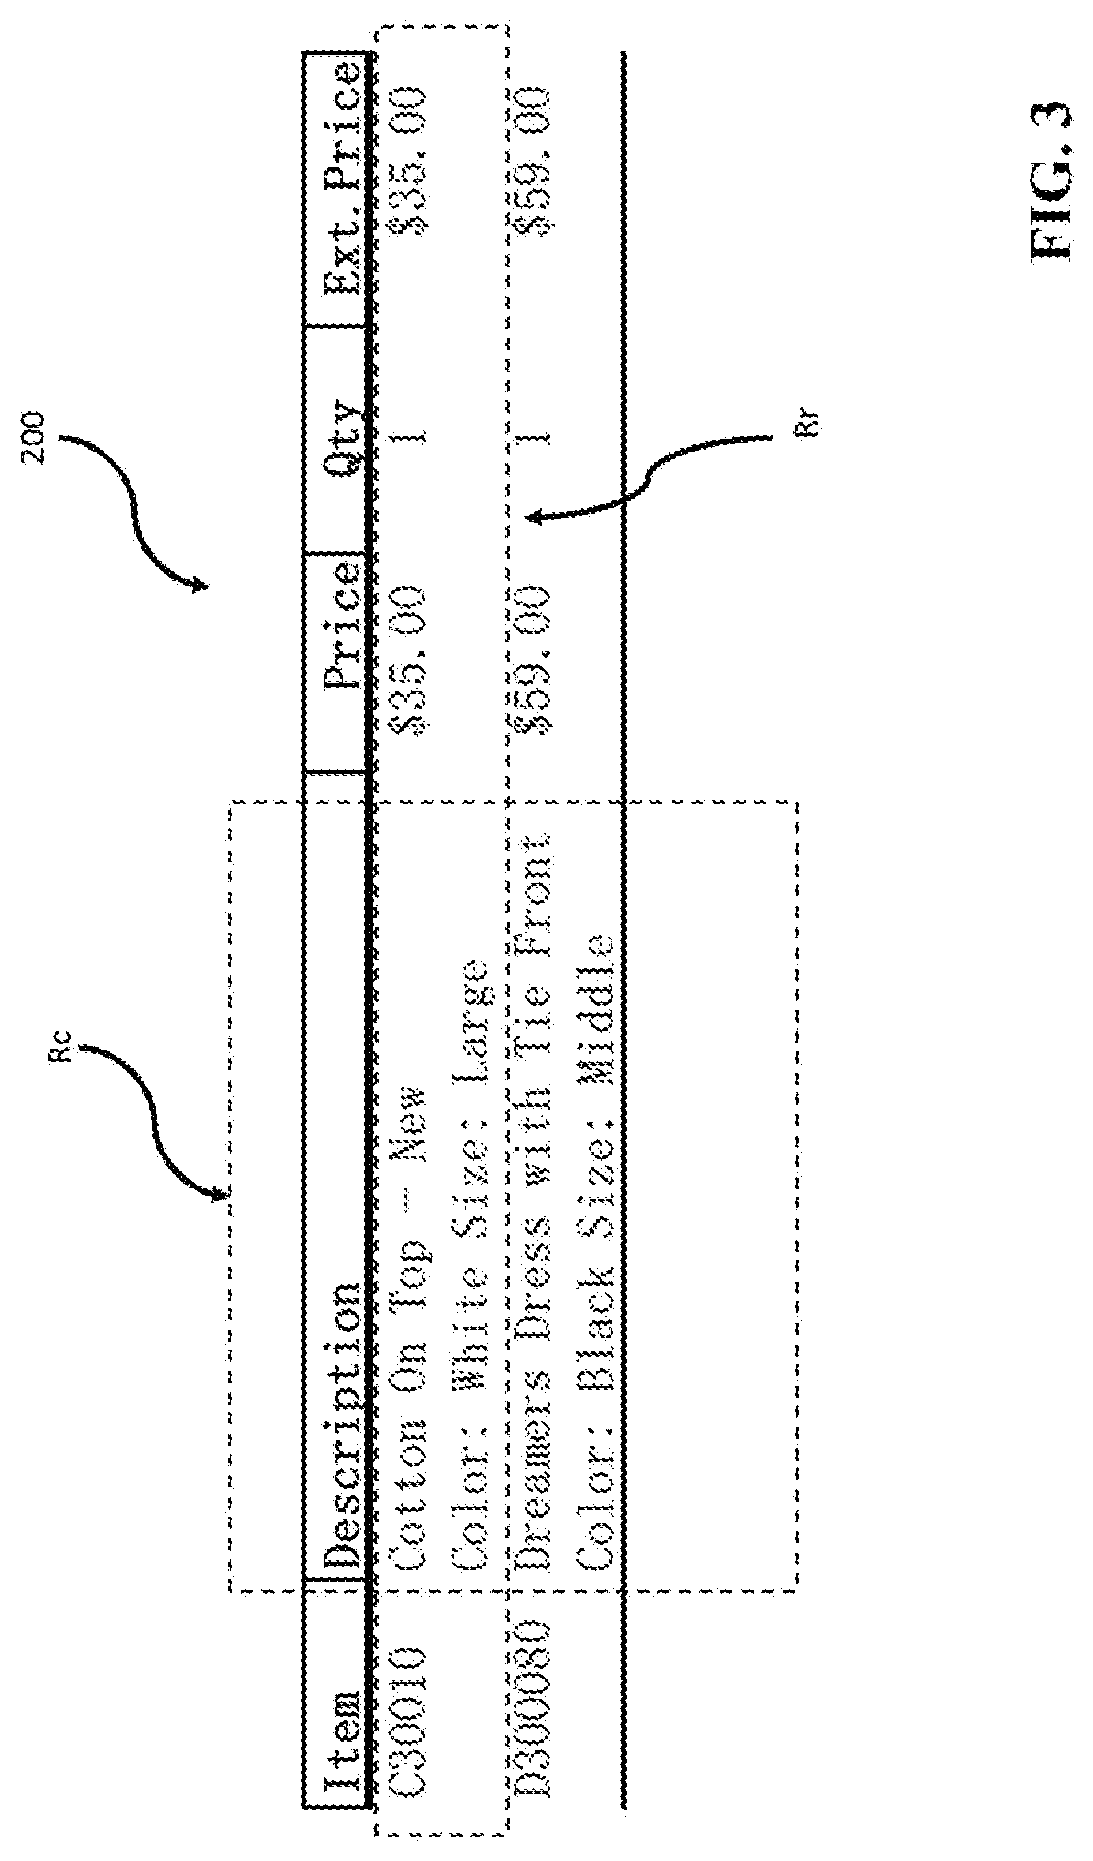 Apparatus and Method for Recognizing Image-Based Content Presented in a Structured Layout